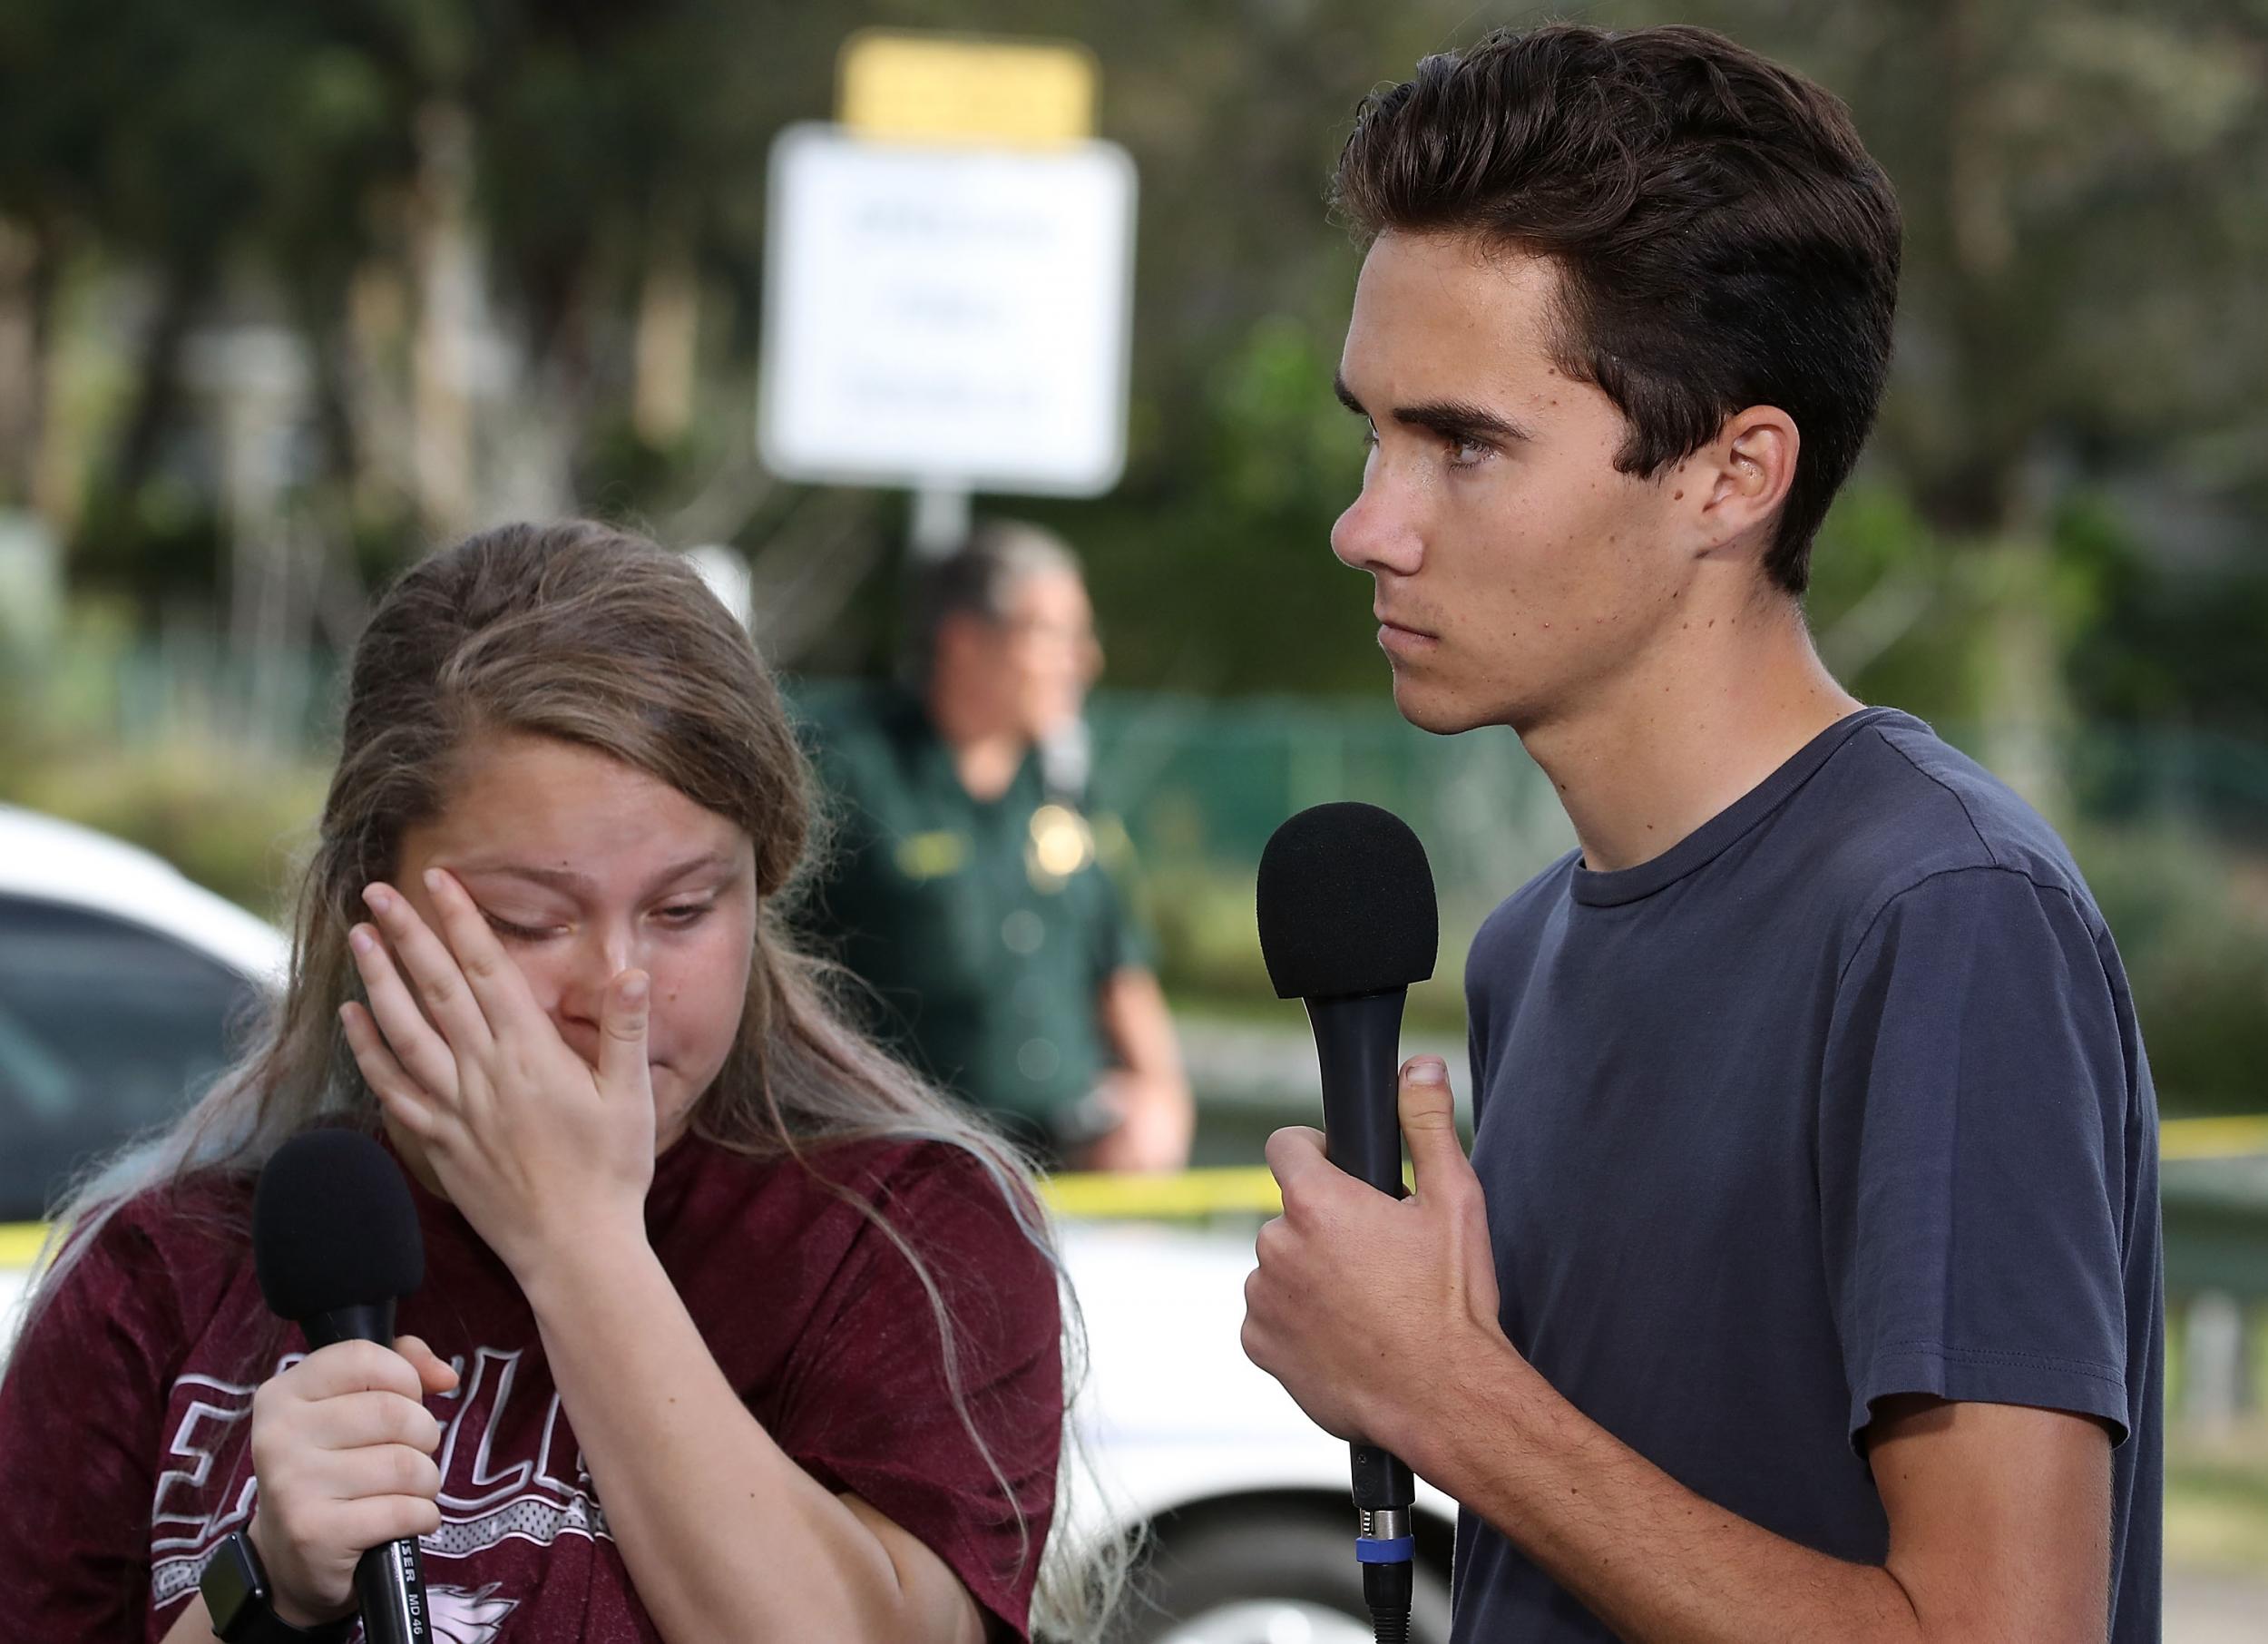 Students Kelsey Friend and David Hogg recount their stories about the mass shooting at the Marjory Stoneman Douglas High School